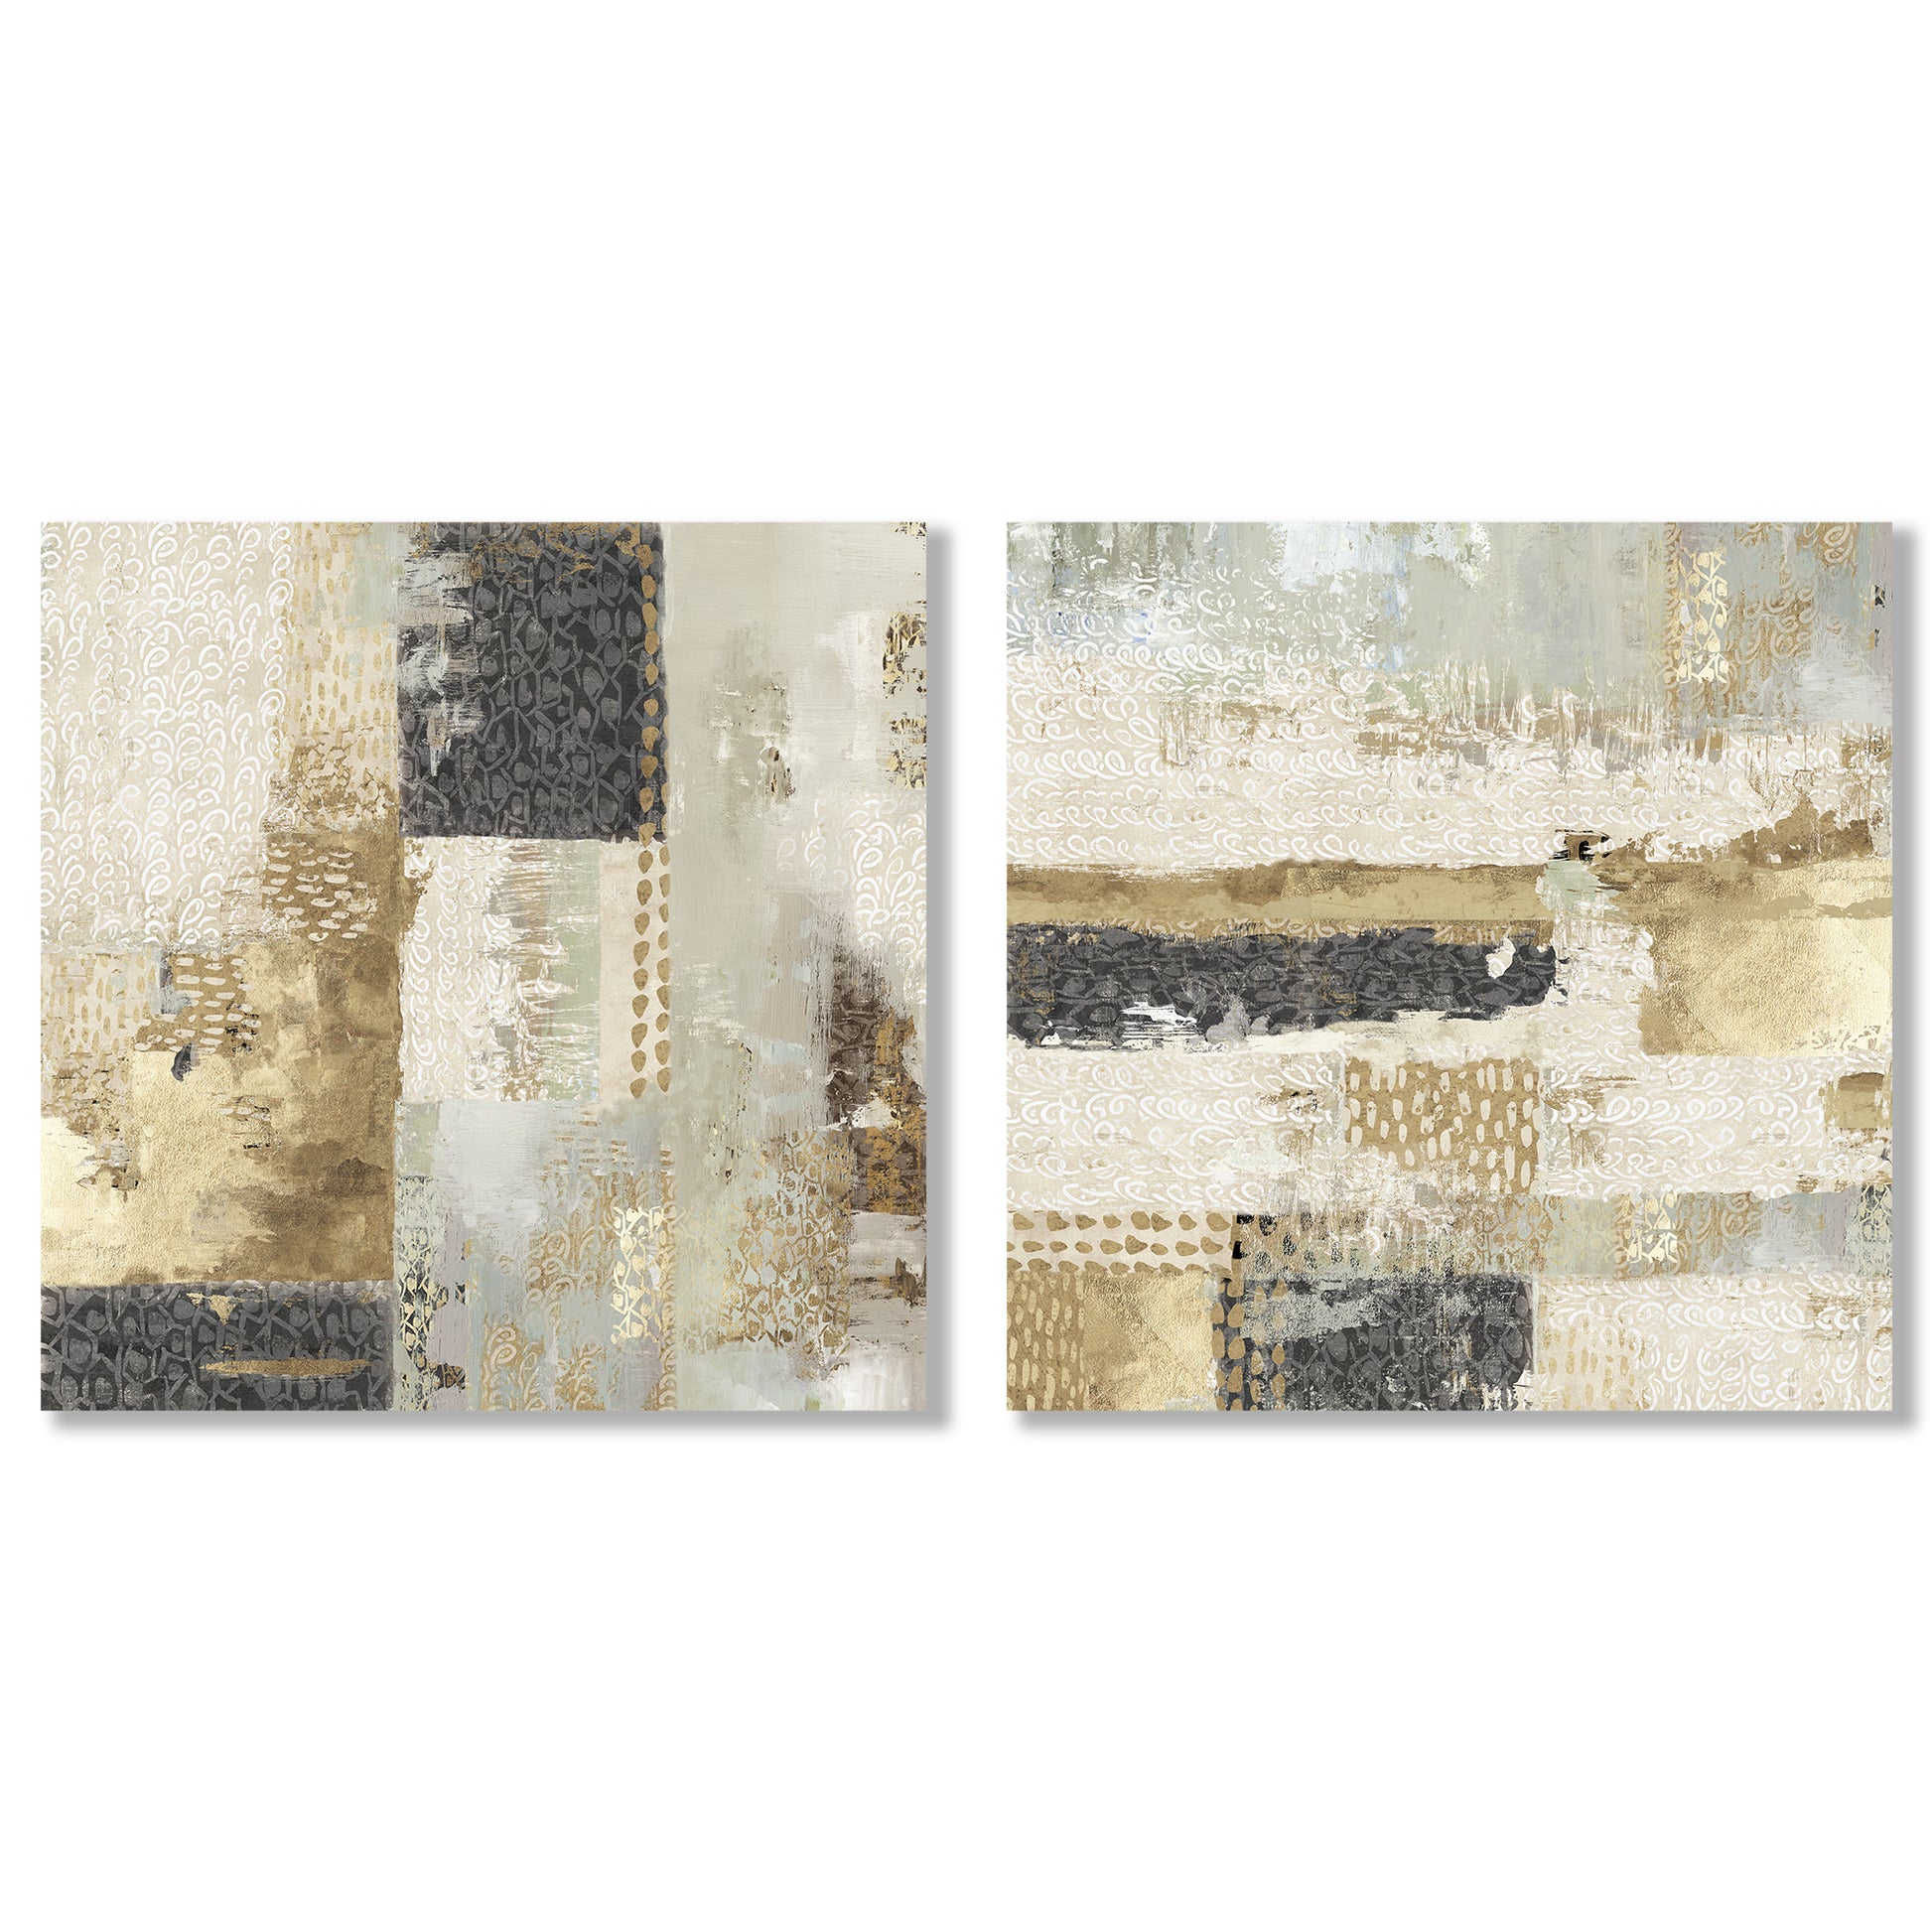 Bare by PI Creative Art - 2 Piece Gallery Wrapped Canvas Set - Art Set - Americanflat